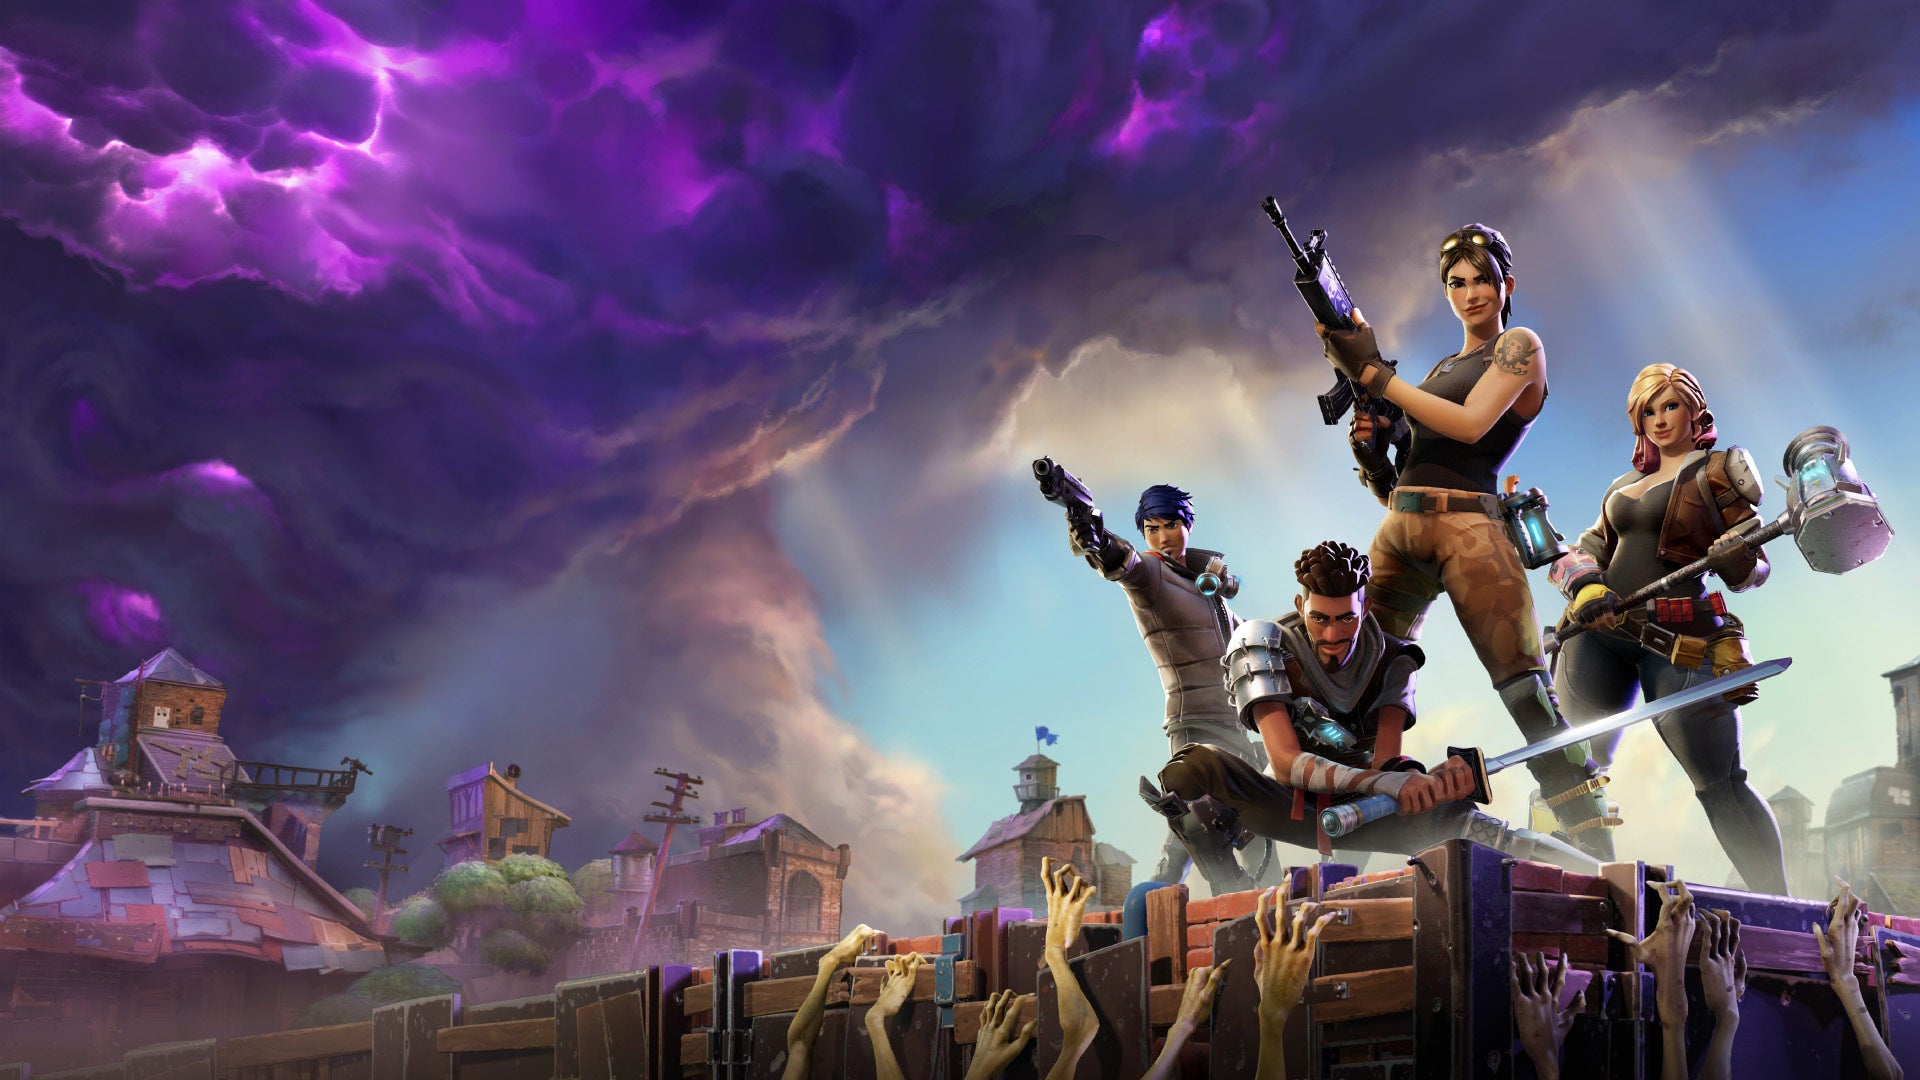 Image for Update: Epic Games to pay $520 million in FTC lawsuit over privacy violations and deceptive interfaces